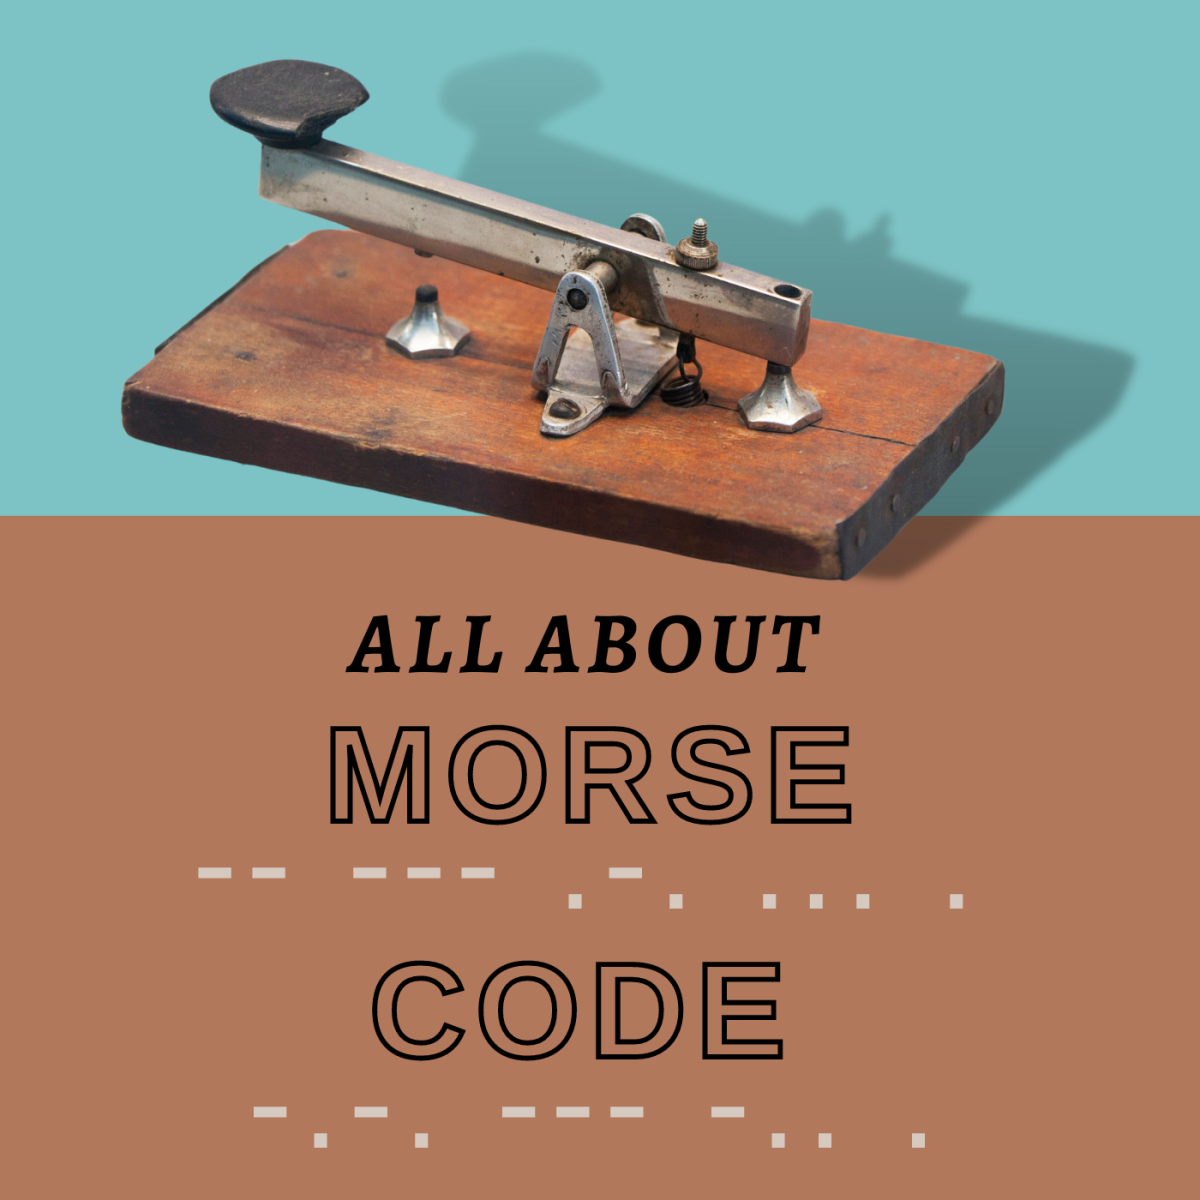 Is Morse Code Used Today? The Brief History and Importance of Morse Code